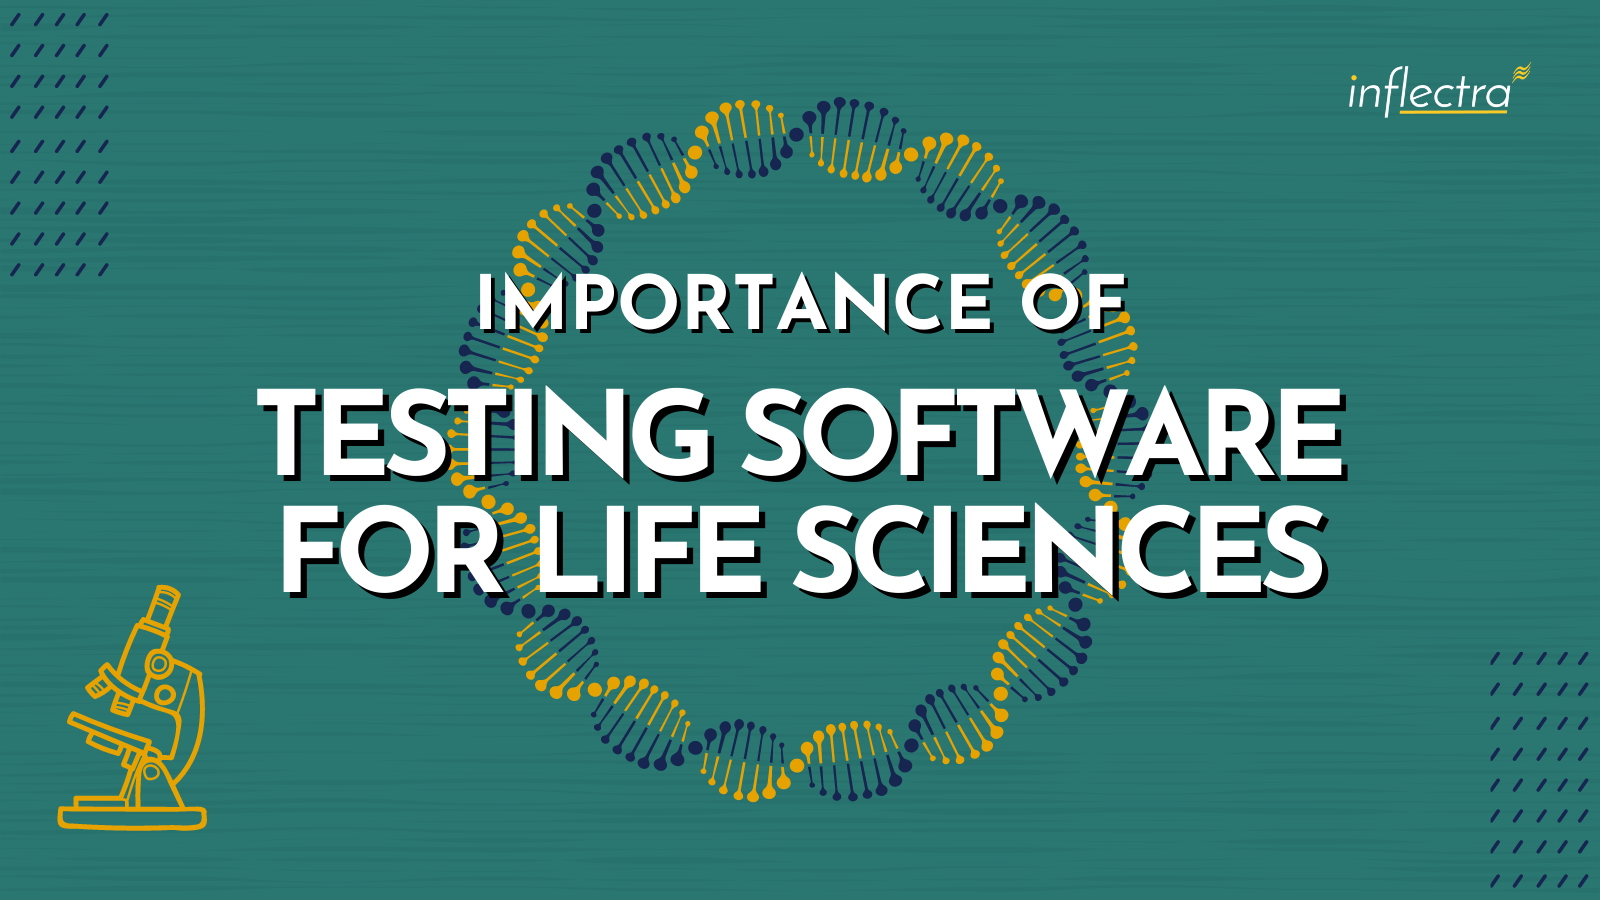 inflectra-blog-importance-of-testing-software-for-life-sciences-image